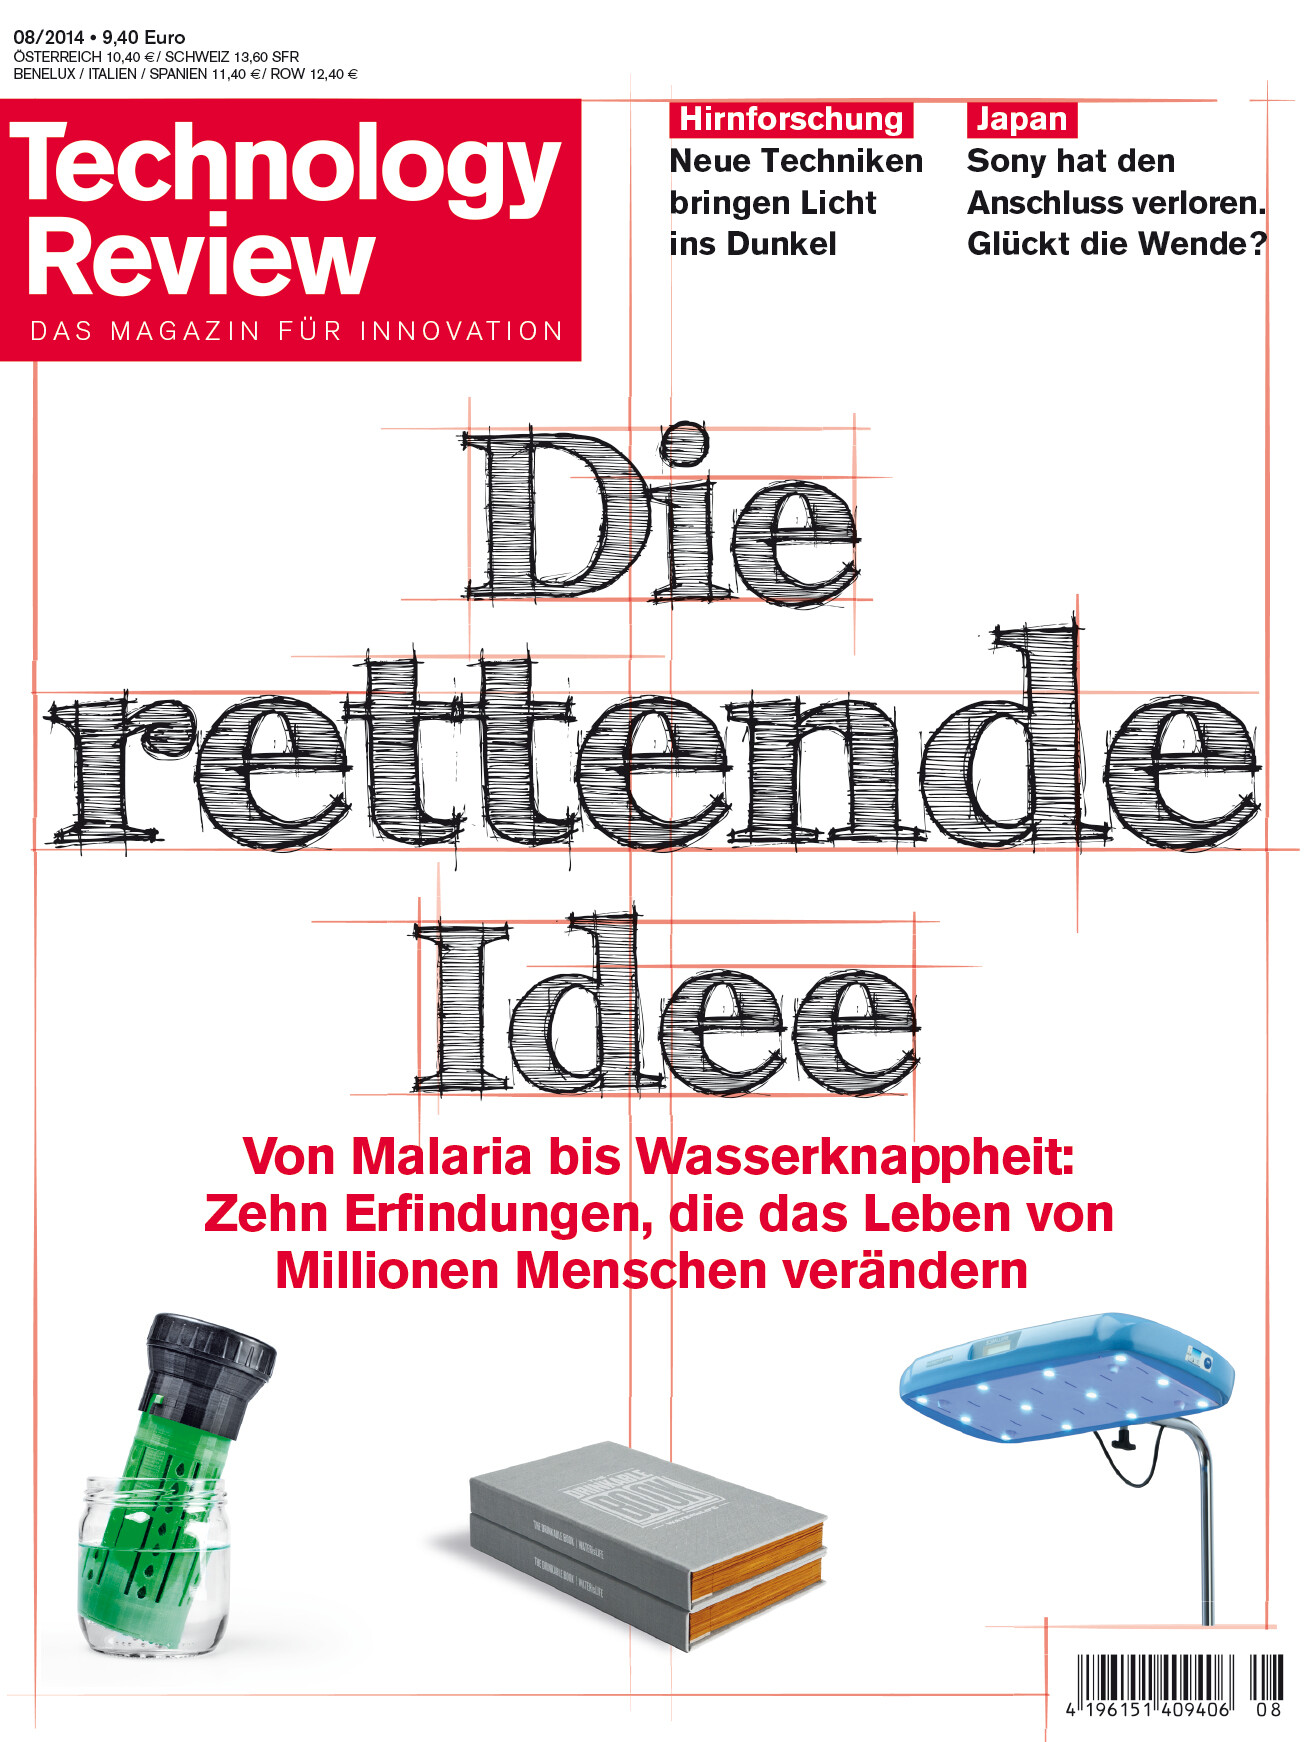 Technology Review 08/2014